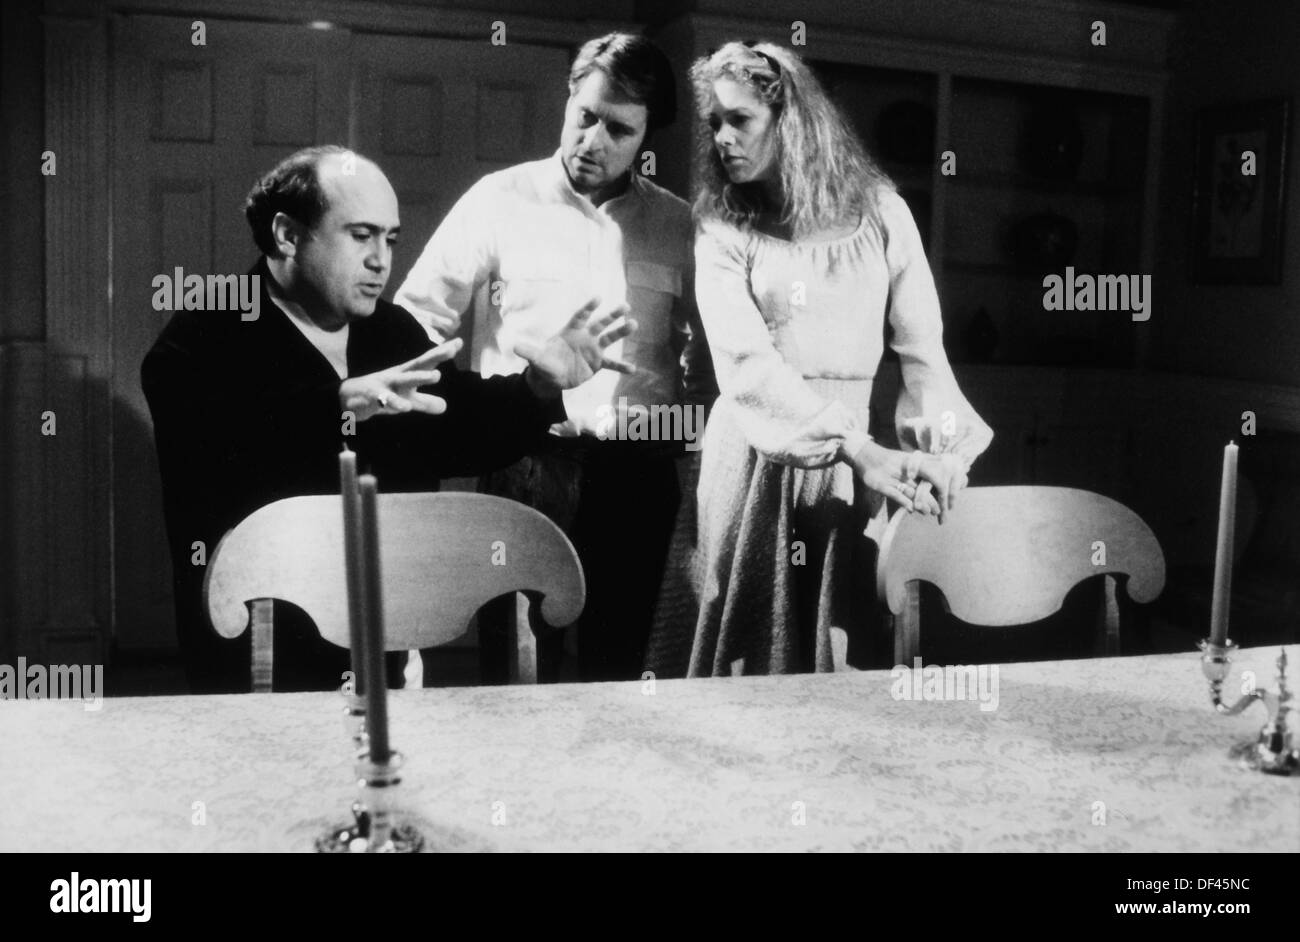 Danny Devito Directing Michael Douglas and Kathleen Turner on-set of the Film, 'The War of the Roses', Photo by Francois Duhamel, Gracie Films with Distribution via 20th Century Fox, 1989 Stock Photo